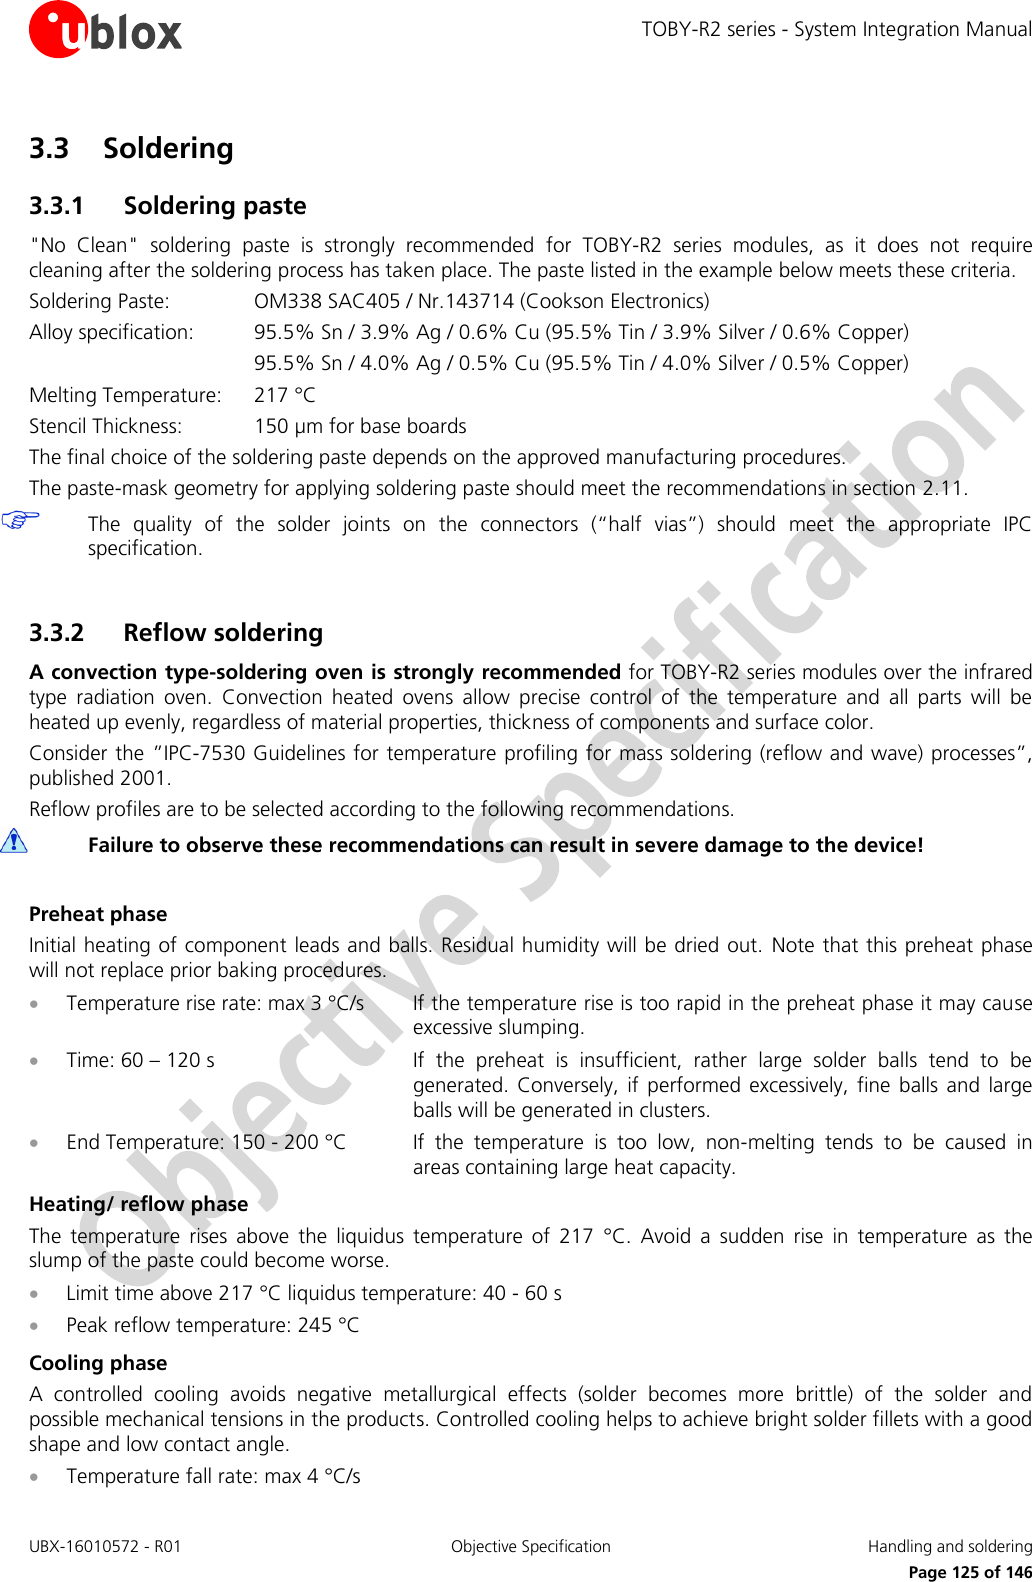 TOBY-R2 series - System Integration Manual UBX-16010572 - R01  Objective Specification  Handling and soldering     Page 125 of 146 3.3 Soldering 3.3.1 Soldering paste &quot;No  Clean&quot;  soldering  paste  is  strongly  recommended  for  TOBY-R2  series  modules,  as  it  does  not  require cleaning after the soldering process has taken place. The paste listed in the example below meets these criteria. Soldering Paste:    OM338 SAC405 / Nr.143714 (Cookson Electronics) Alloy specification:  95.5% Sn / 3.9% Ag / 0.6% Cu (95.5% Tin / 3.9% Silver / 0.6% Copper)       95.5% Sn / 4.0% Ag / 0.5% Cu (95.5% Tin / 4.0% Silver / 0.5% Copper) Melting Temperature:   217 °C Stencil Thickness:  150 µm for base boards The final choice of the soldering paste depends on the approved manufacturing procedures. The paste-mask geometry for applying soldering paste should meet the recommendations in section 2.11.  The  quality  of  the  solder  joints  on  the  connectors  (“half  vias”)  should  meet  the  appropriate  IPC specification.  3.3.2 Reflow soldering A convection type-soldering oven is strongly recommended for TOBY-R2 series modules over the infrared type  radiation  oven.  Convection  heated  ovens  allow  precise  control  of  the  temperature  and  all  parts  will  be heated up evenly, regardless of material properties, thickness of components and surface color. Consider the ”IPC-7530 Guidelines for temperature profiling for mass soldering (reflow and wave) processes”, published 2001. Reflow profiles are to be selected according to the following recommendations.  Failure to observe these recommendations can result in severe damage to the device!  Preheat phase Initial heating of component leads and balls. Residual humidity will be dried out.  Note that this preheat phase will not replace prior baking procedures.  Temperature rise rate: max 3 °C/s  If the temperature rise is too rapid in the preheat phase it may cause excessive slumping.  Time: 60 – 120 s  If  the  preheat  is  insufficient,  rather  large  solder  balls  tend  to  be generated.  Conversely, if  performed  excessively,  fine  balls  and  large balls will be generated in clusters.  End Temperature: 150 - 200 °C  If  the  temperature  is  too  low,  non-melting  tends  to  be  caused  in areas containing large heat capacity. Heating/ reflow phase The  temperature  rises  above  the  liquidus  temperature  of  217  °C.  Avoid  a  sudden  rise  in  temperature  as  the slump of the paste could become worse.  Limit time above 217 °C liquidus temperature: 40 - 60 s  Peak reflow temperature: 245 °C Cooling phase A  controlled  cooling  avoids  negative  metallurgical  effects  (solder  becomes  more  brittle)  of  the  solder  and possible mechanical tensions in the products. Controlled cooling helps to achieve bright solder fillets with a good shape and low contact angle.  Temperature fall rate: max 4 °C/s 